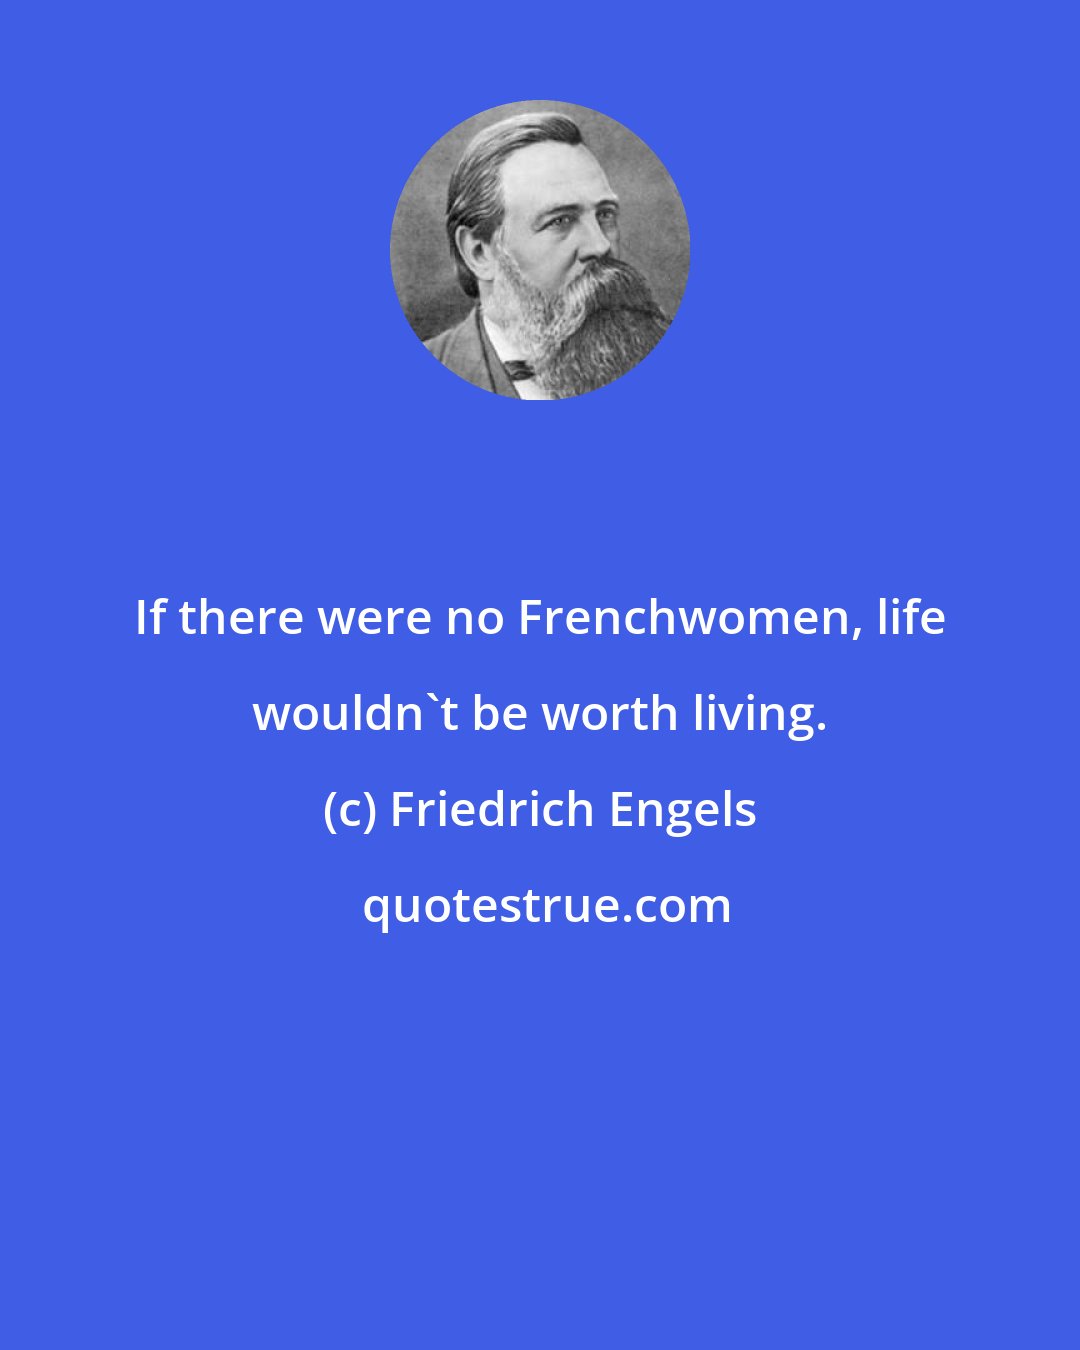 Friedrich Engels: If there were no Frenchwomen, life wouldn't be worth living.